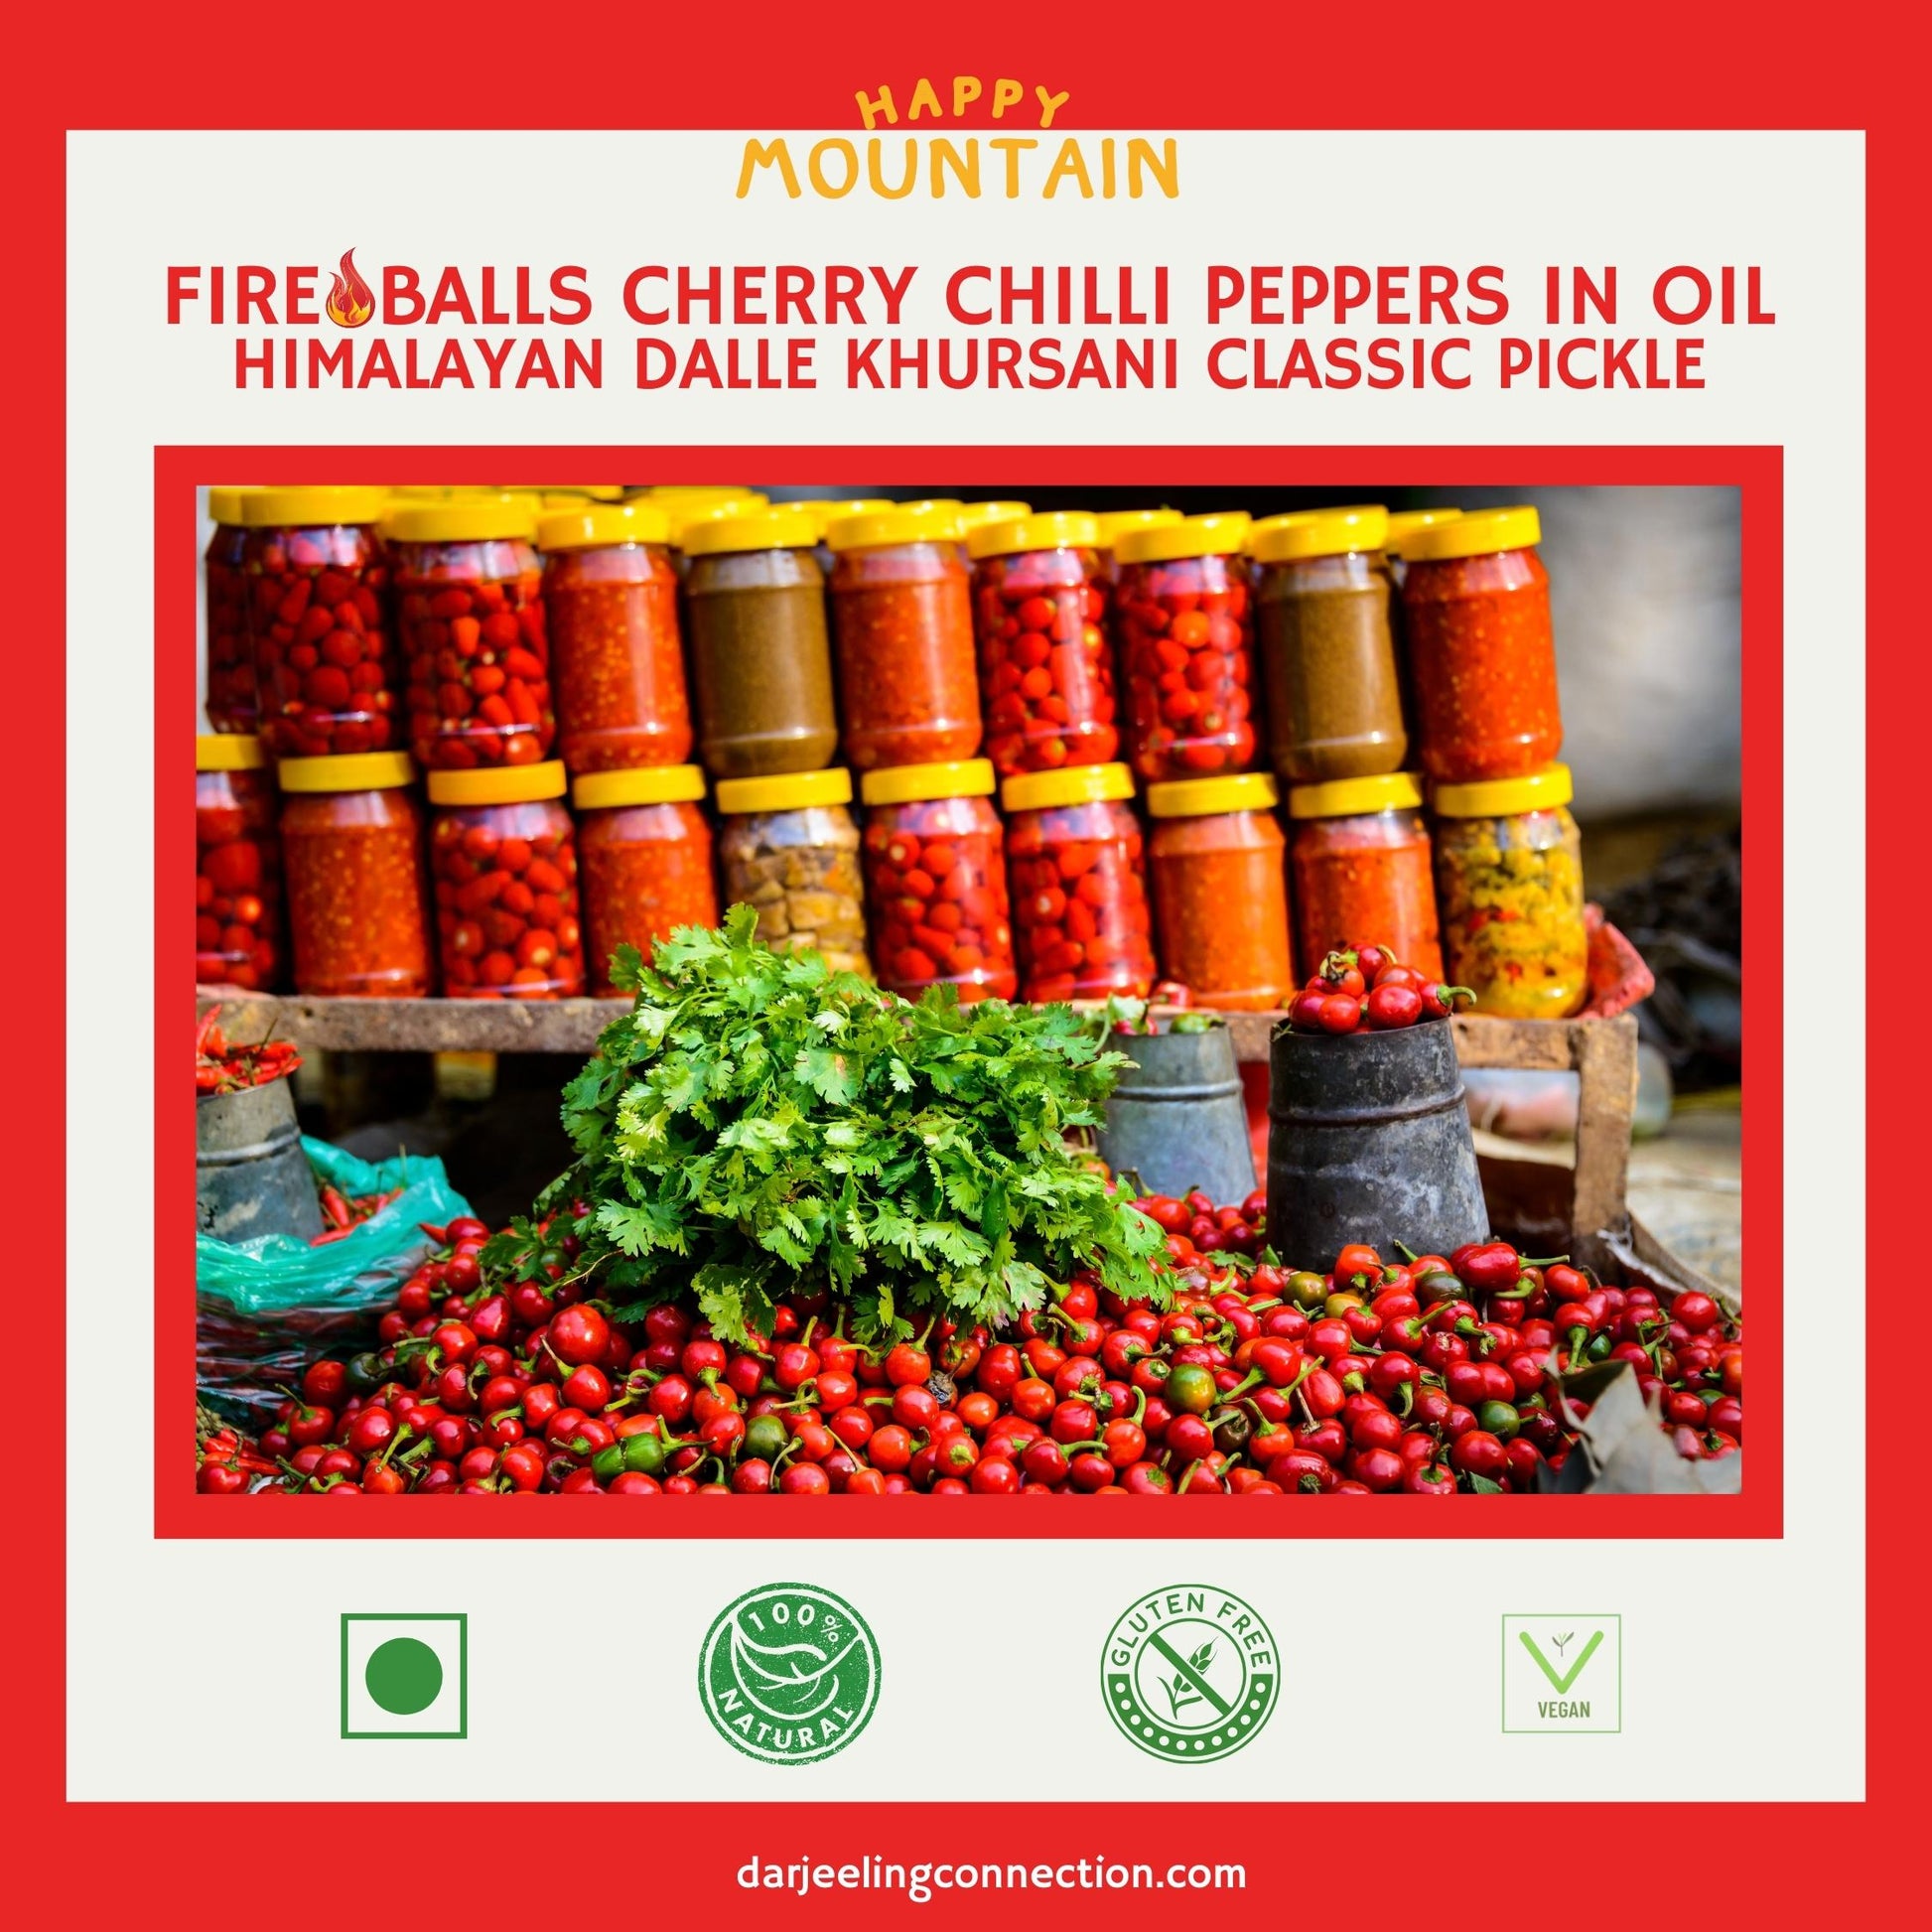 Enjoy our Fireballs Cherry Chilli Peppers (Dalle) in Oil - Happy Mountain